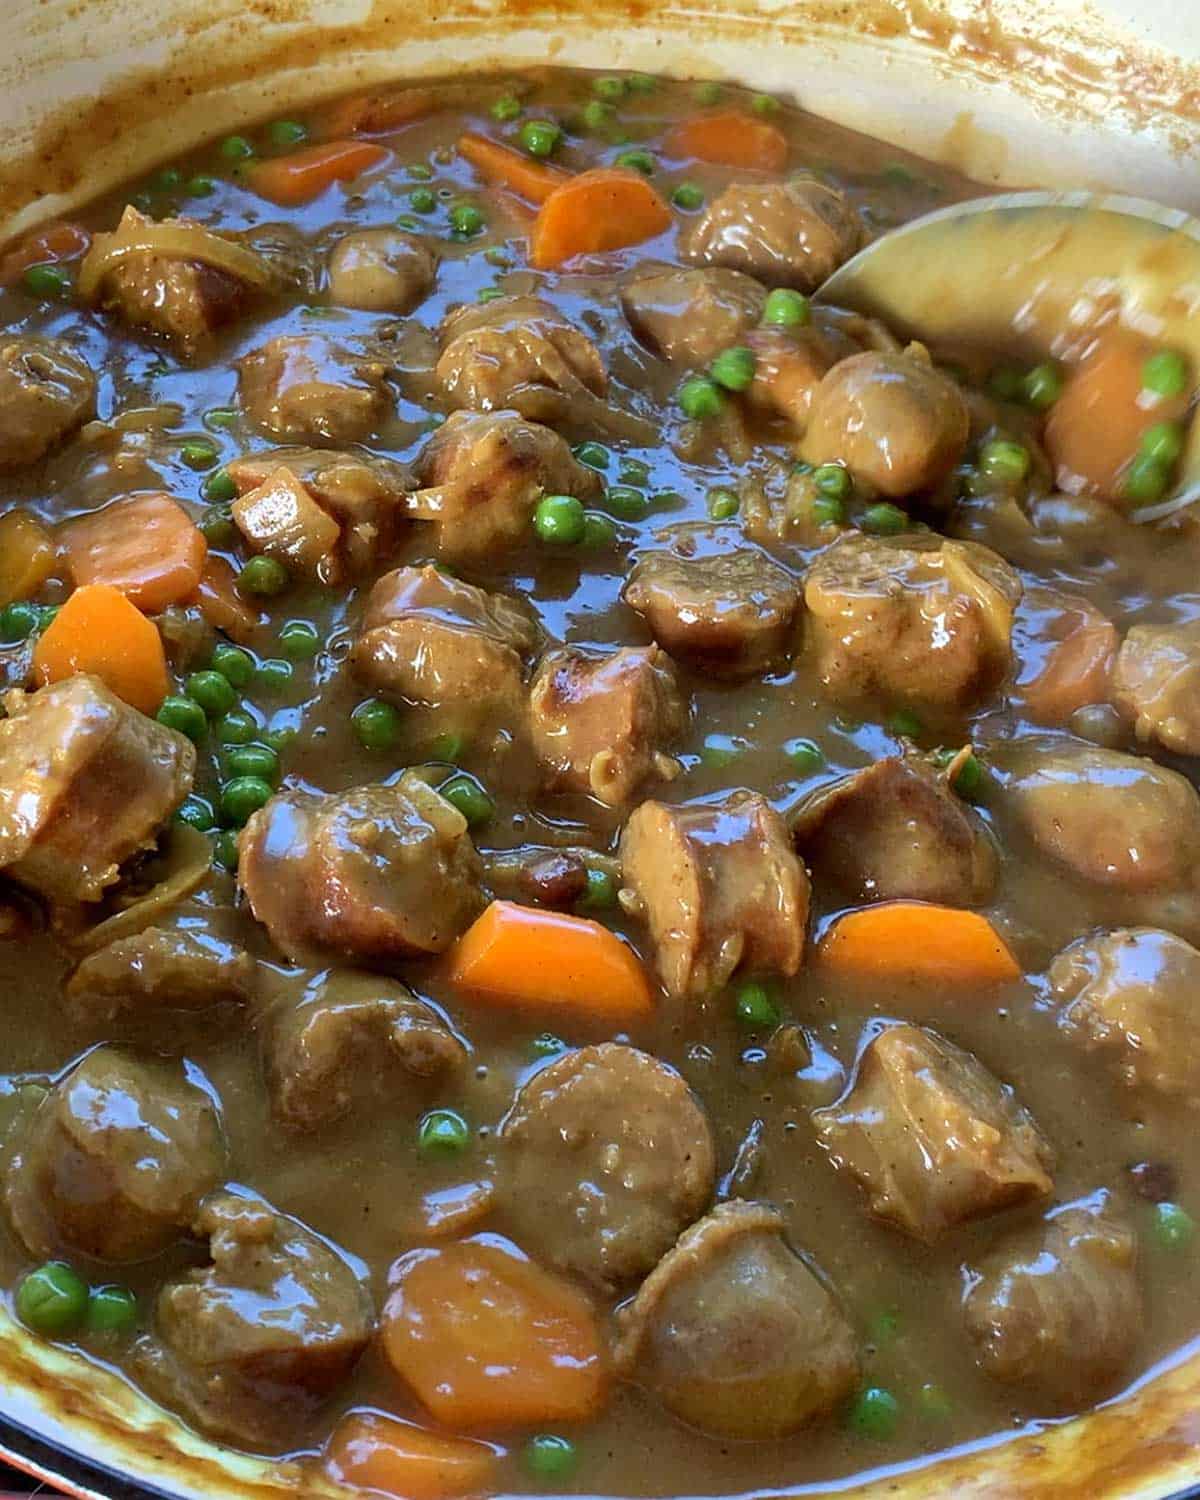 A close up of curried sausages in a casserole dish.